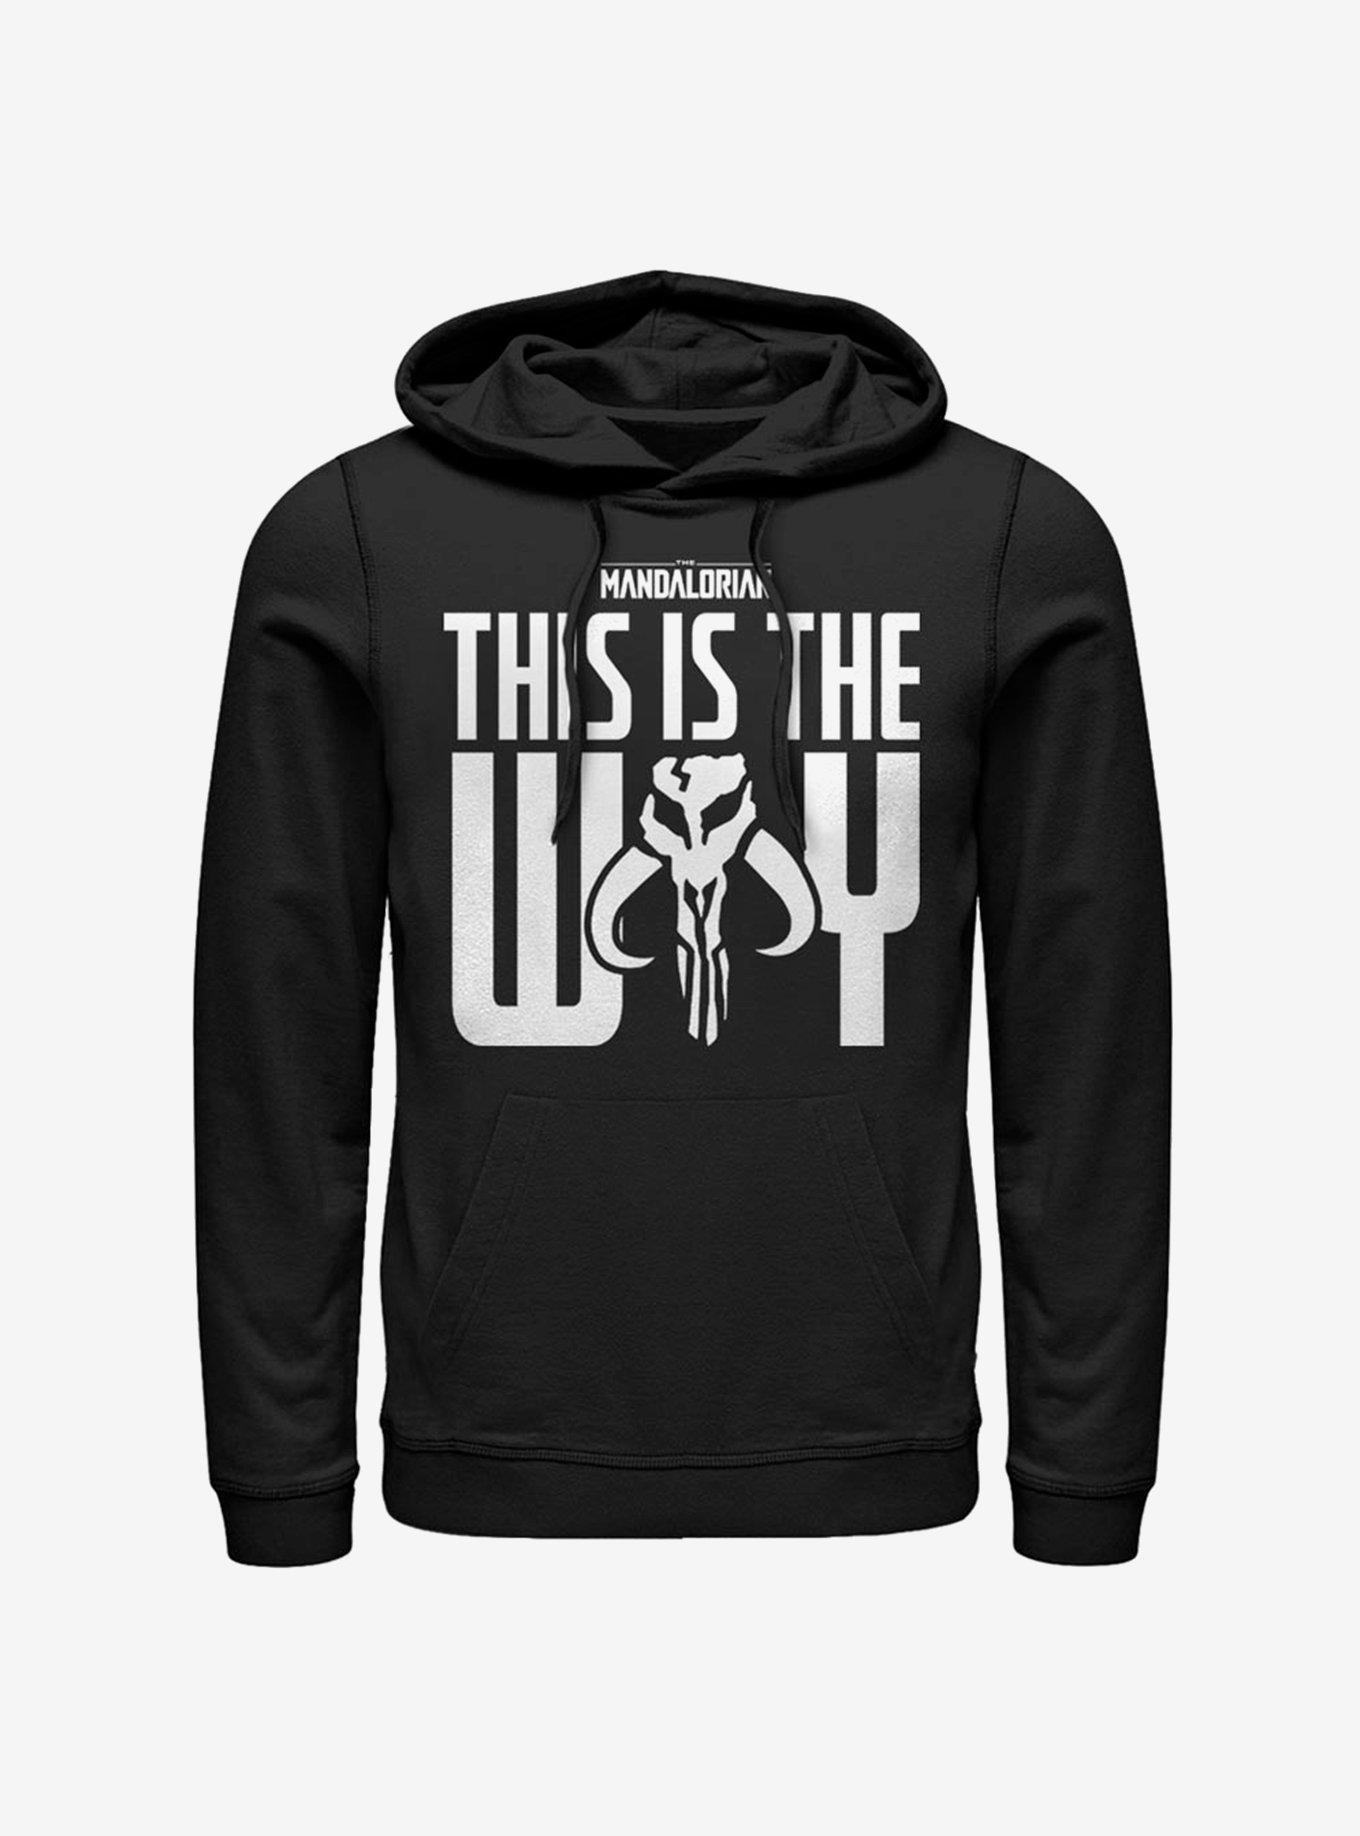 Star Wars The Mandalorian This Is The Way Bold Iron Heart Hoodie, BLACK, hi-res